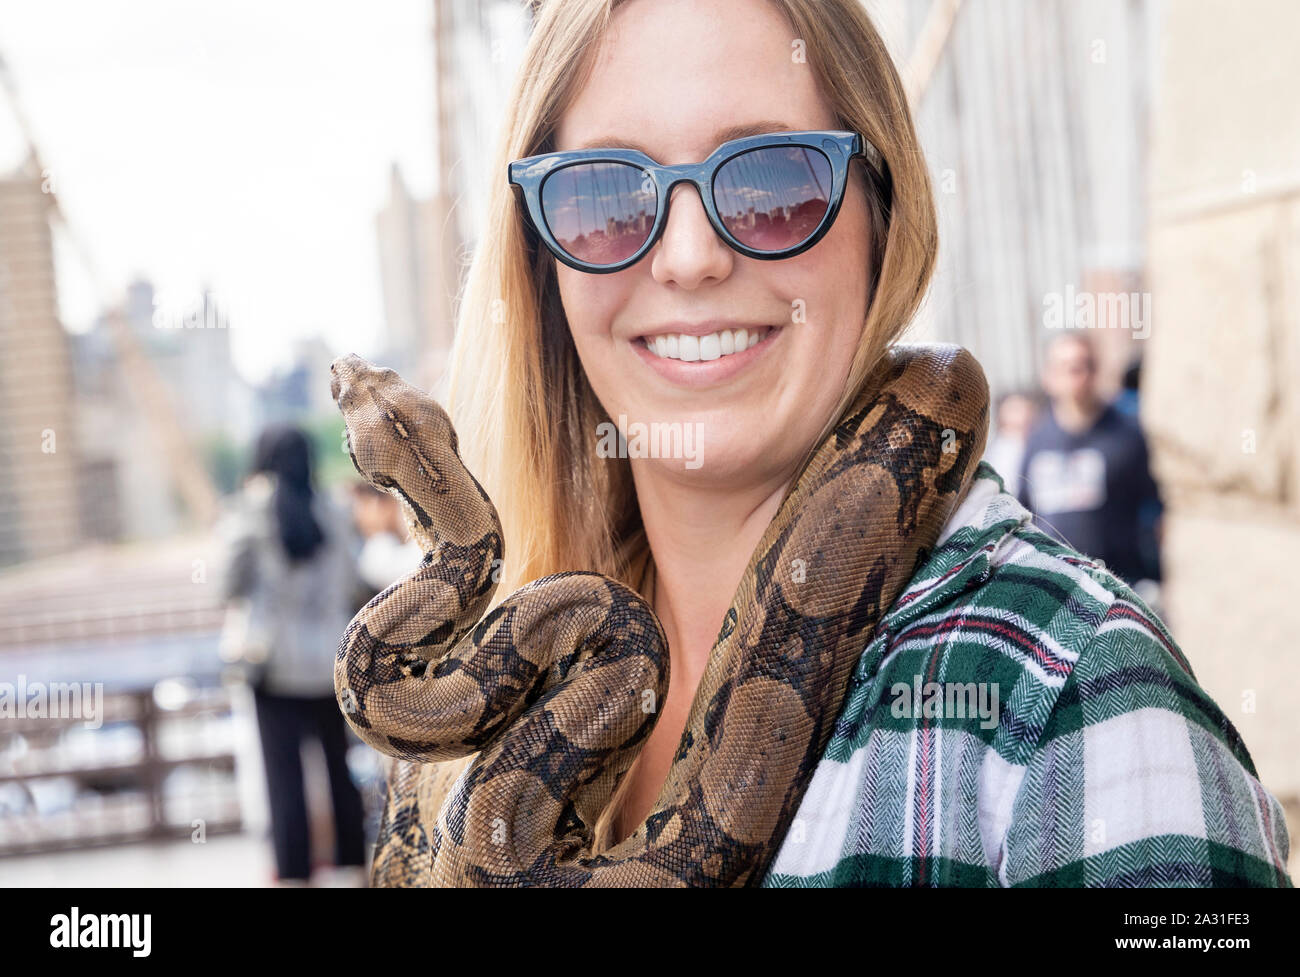 Young, twenties female tourist with a large snake around her neck on the Brooklyn Bridge in New York City, USA. Stock Photo